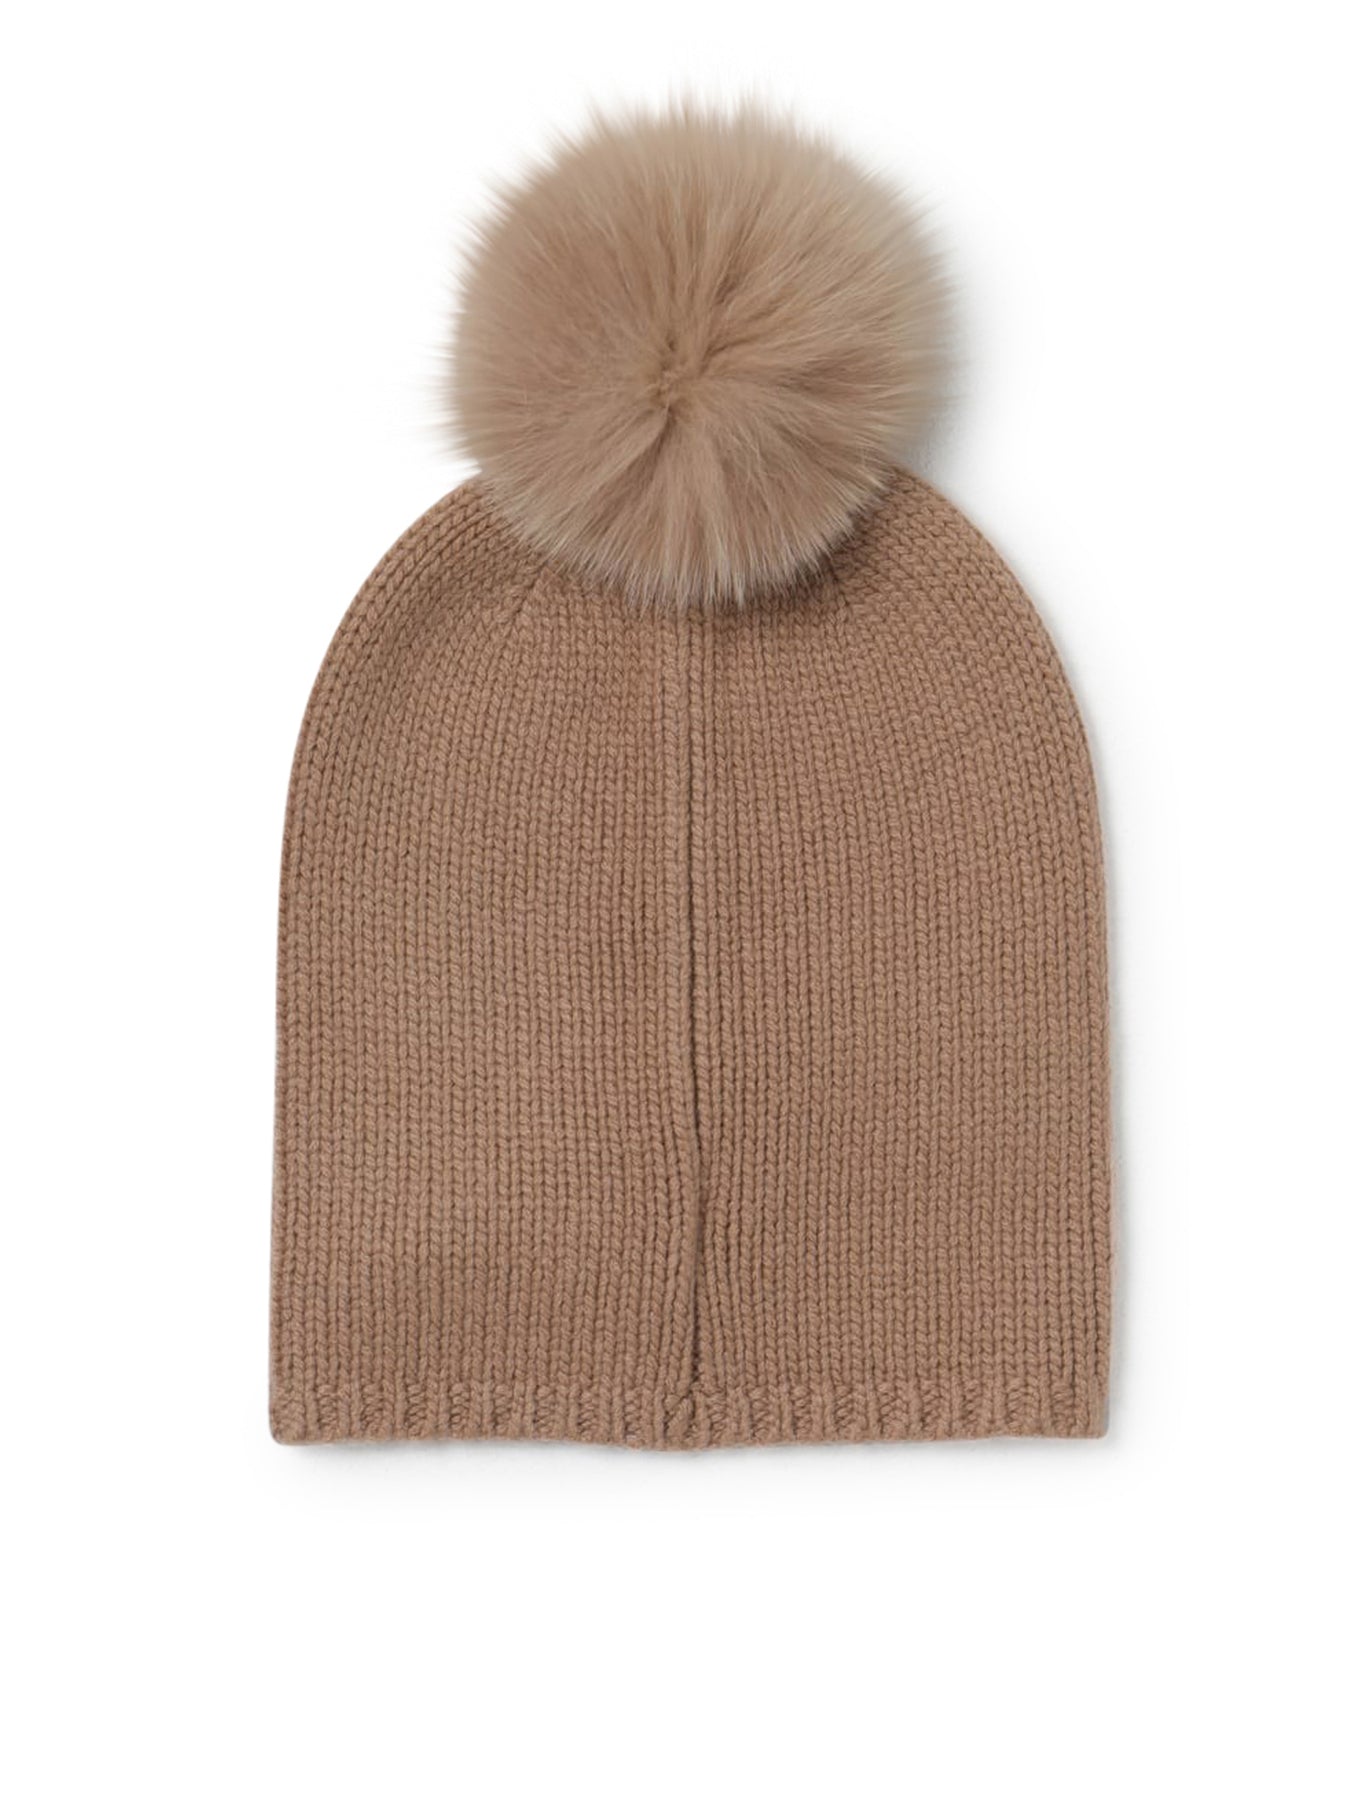 Max Mara hat in cashmere with pompon